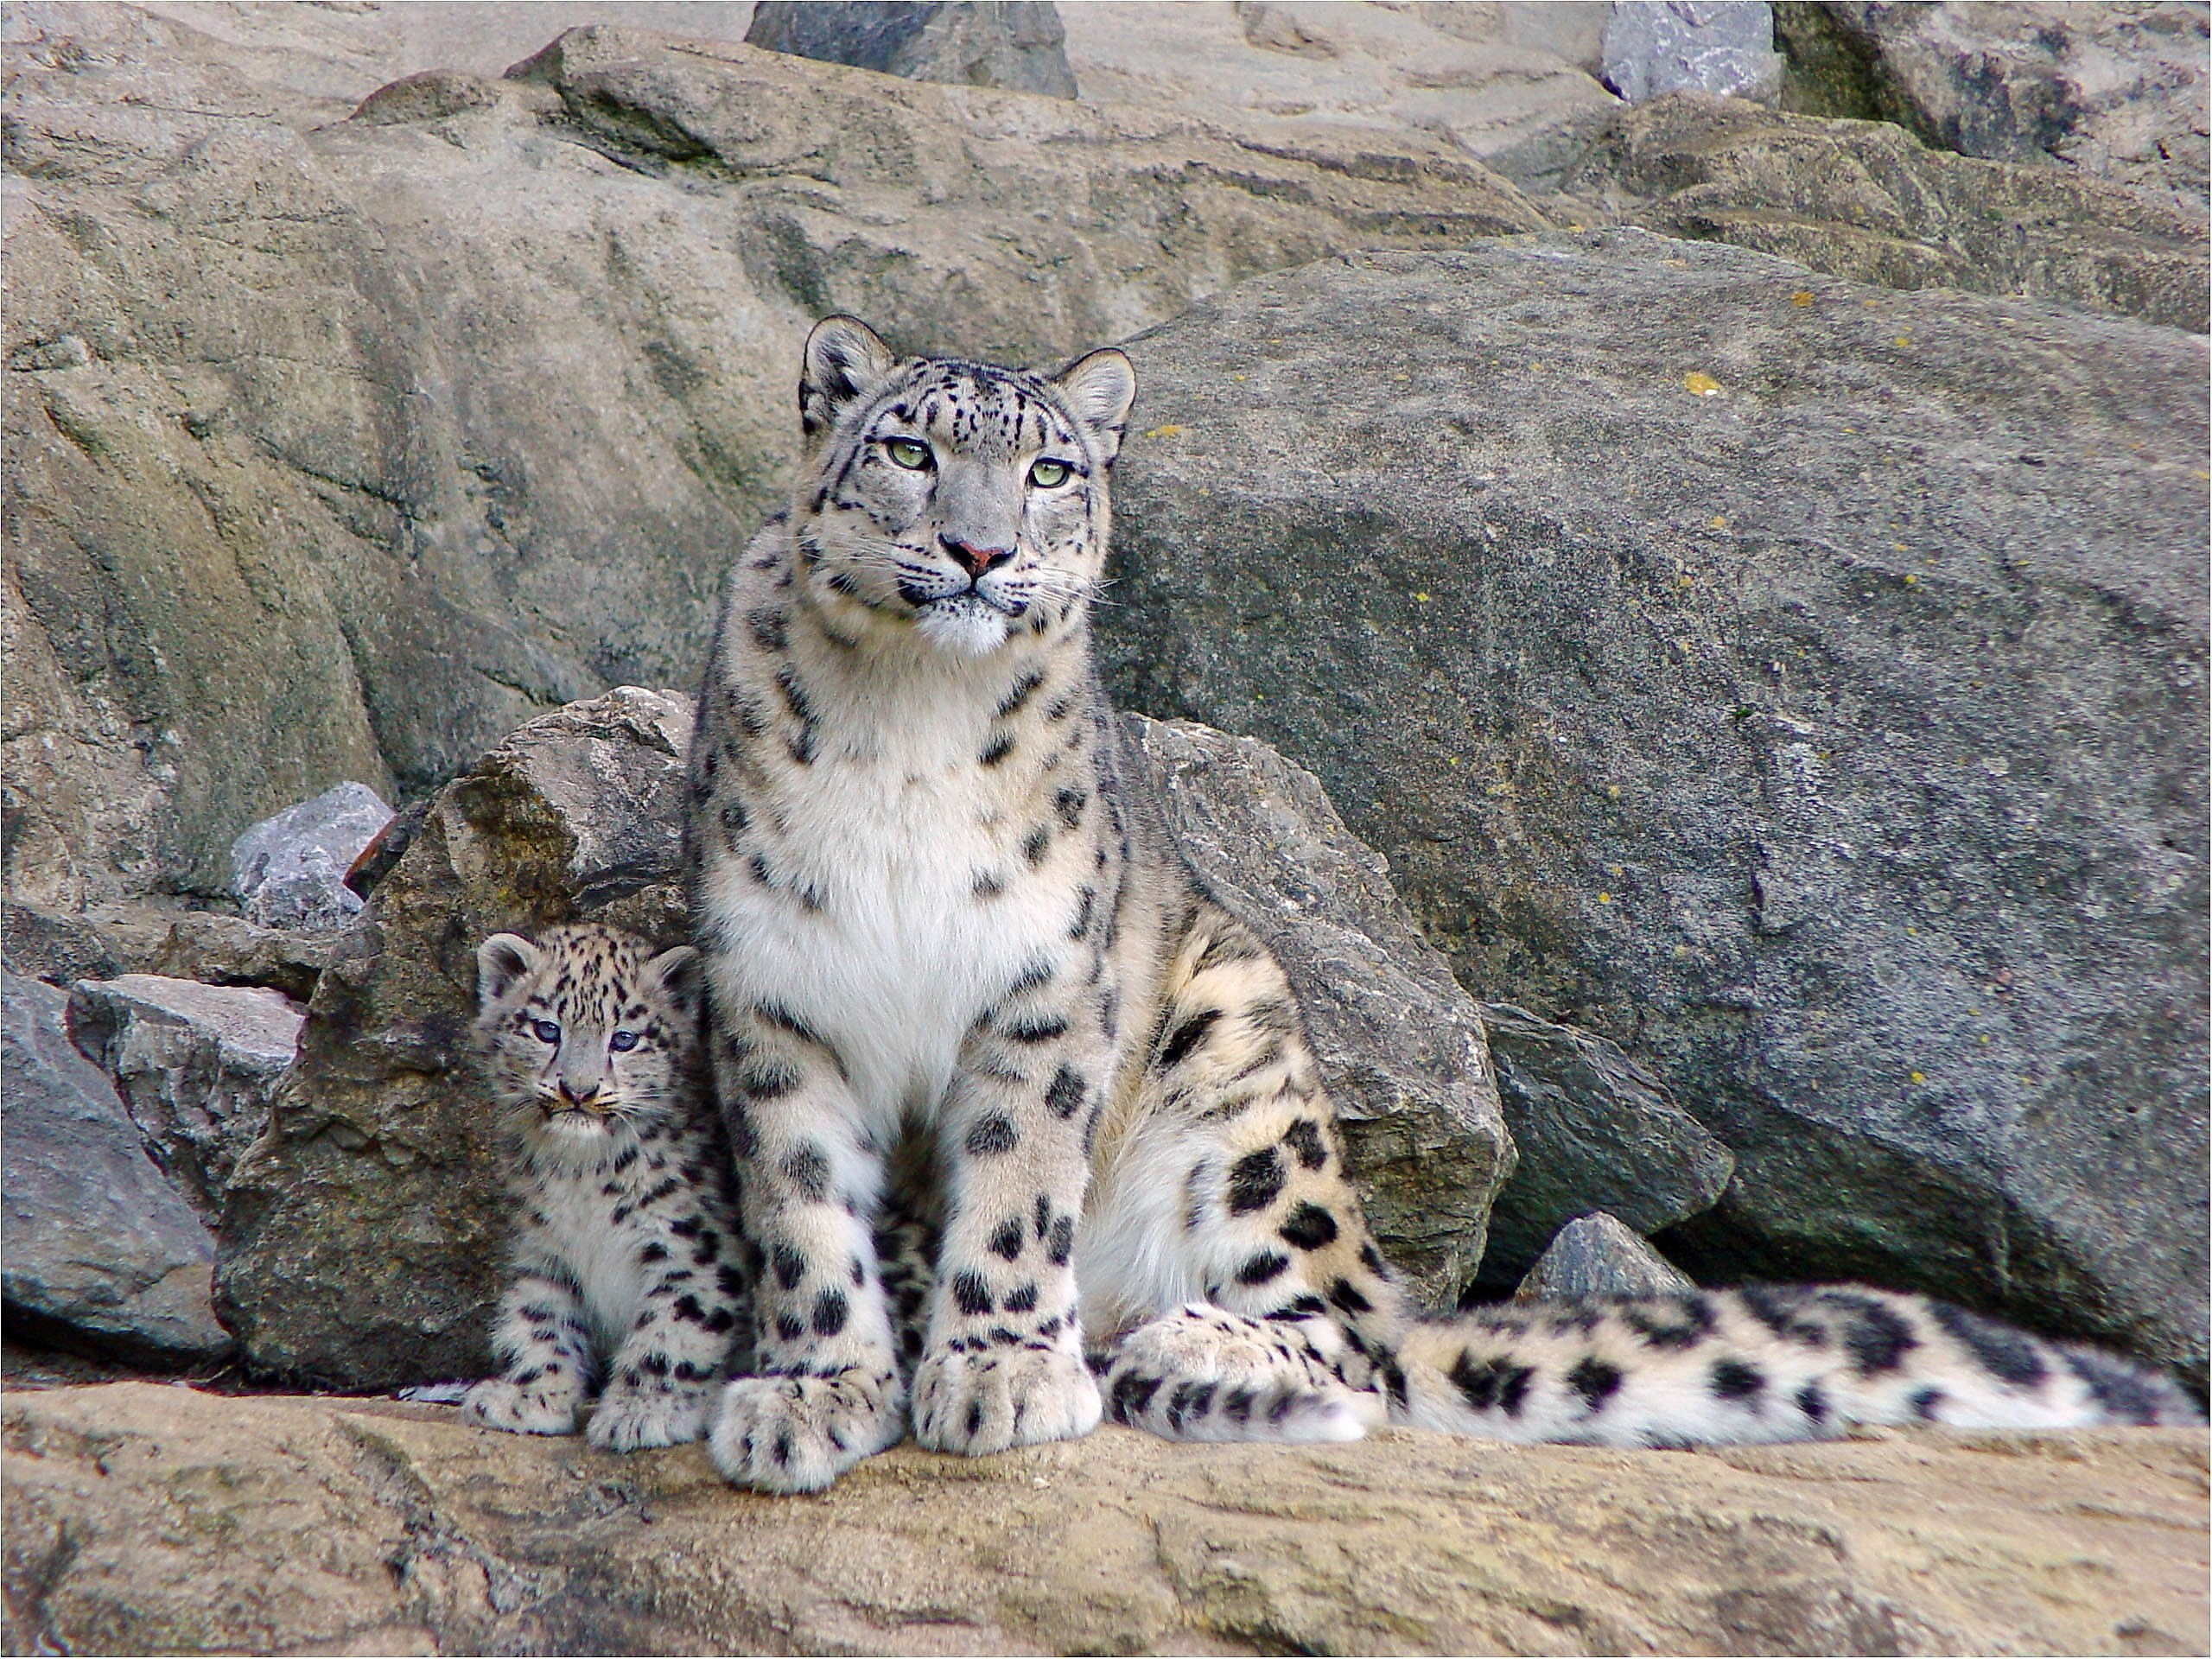 Snow leopards, Rocks, Steam, Cub wallpaper and background